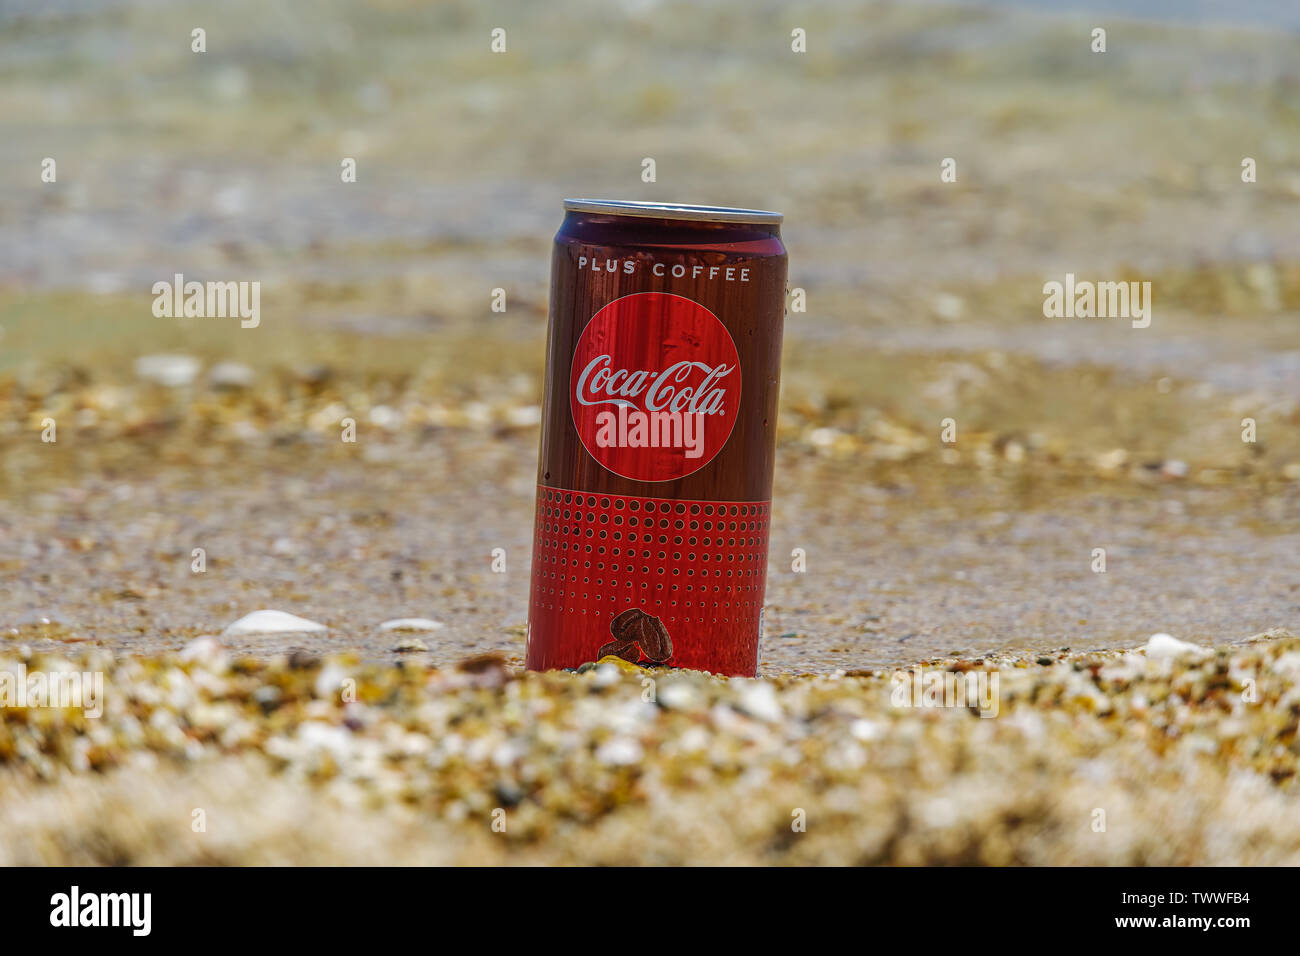 Coca Cola Plus Coffee 330 ml can on sand by the sea. New soft sugarless drink with more caffeine than a Coke Classic, partly submerged on sandy beach Stock Photo